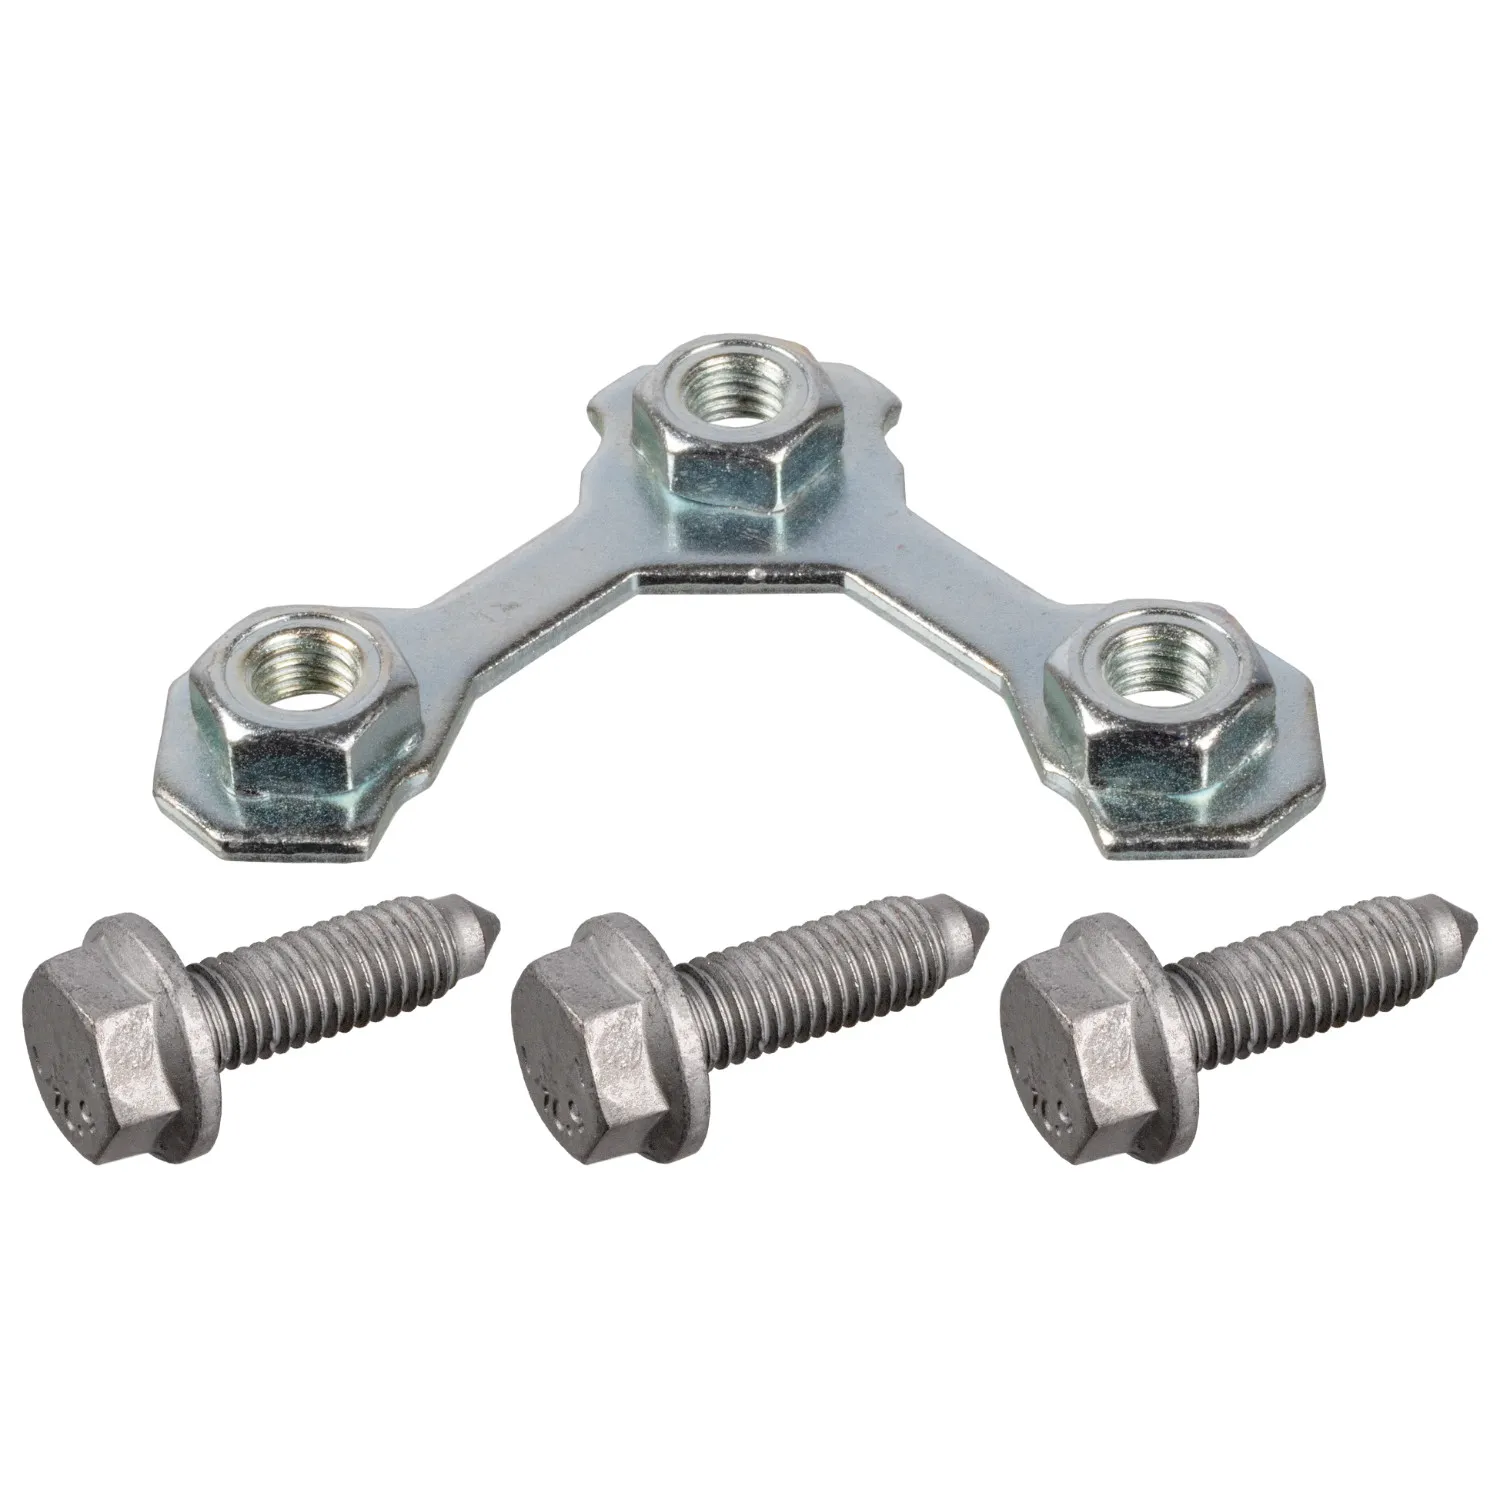 Clamping screw set, ball joint